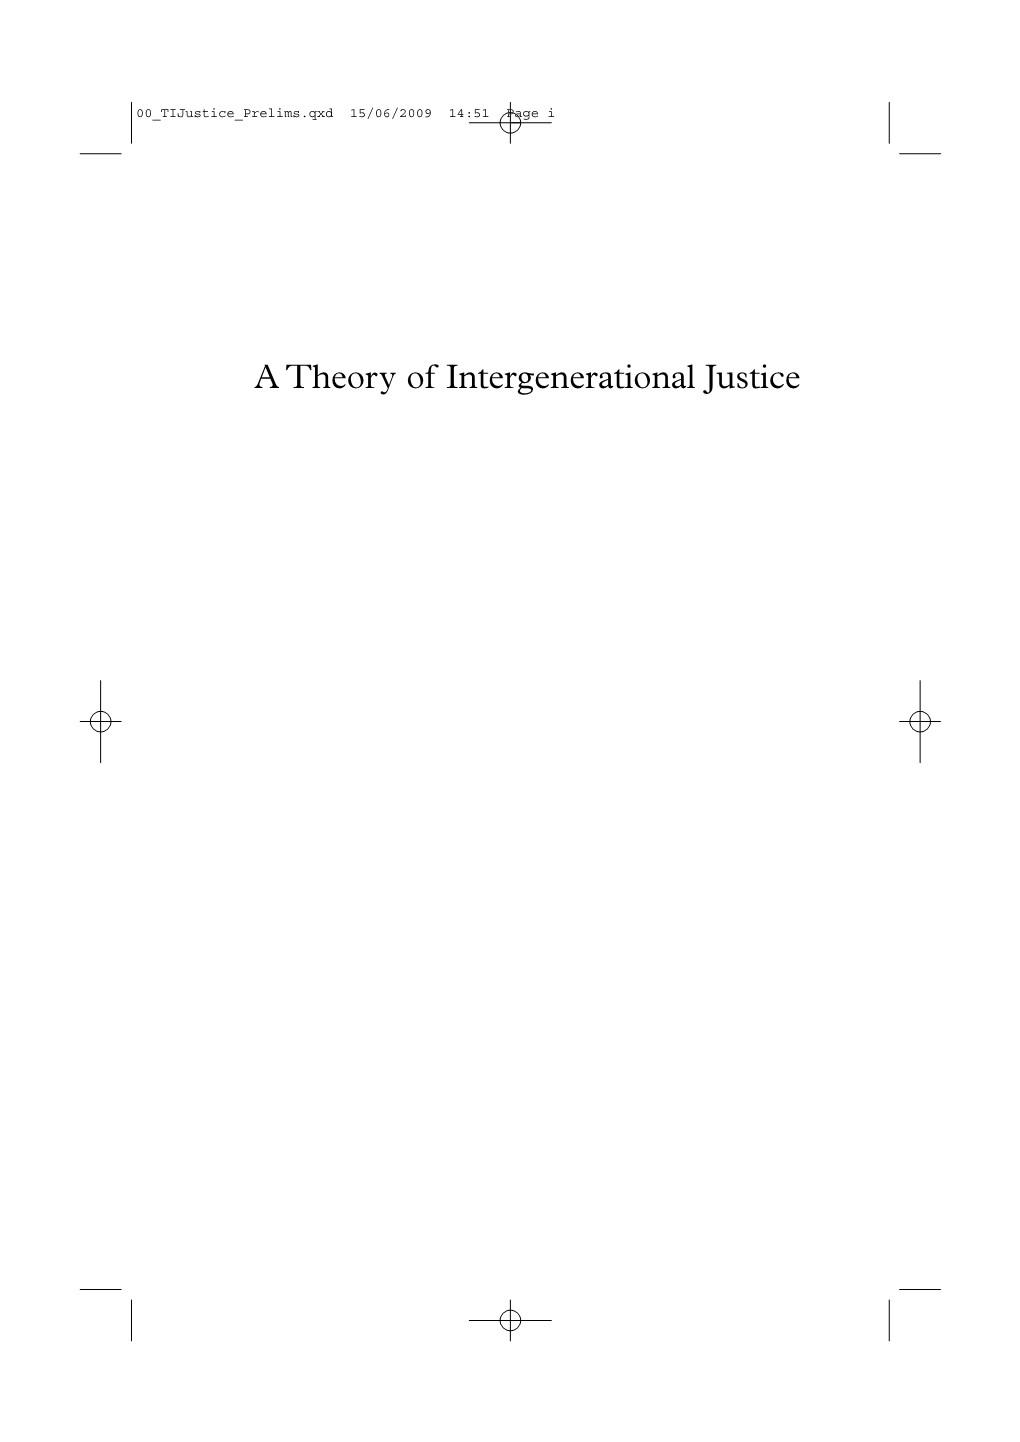 A Theory of Intergenerational Justice 00 Tijustice Prelims.Qxd 15/06/2009 14:51 Page Ii